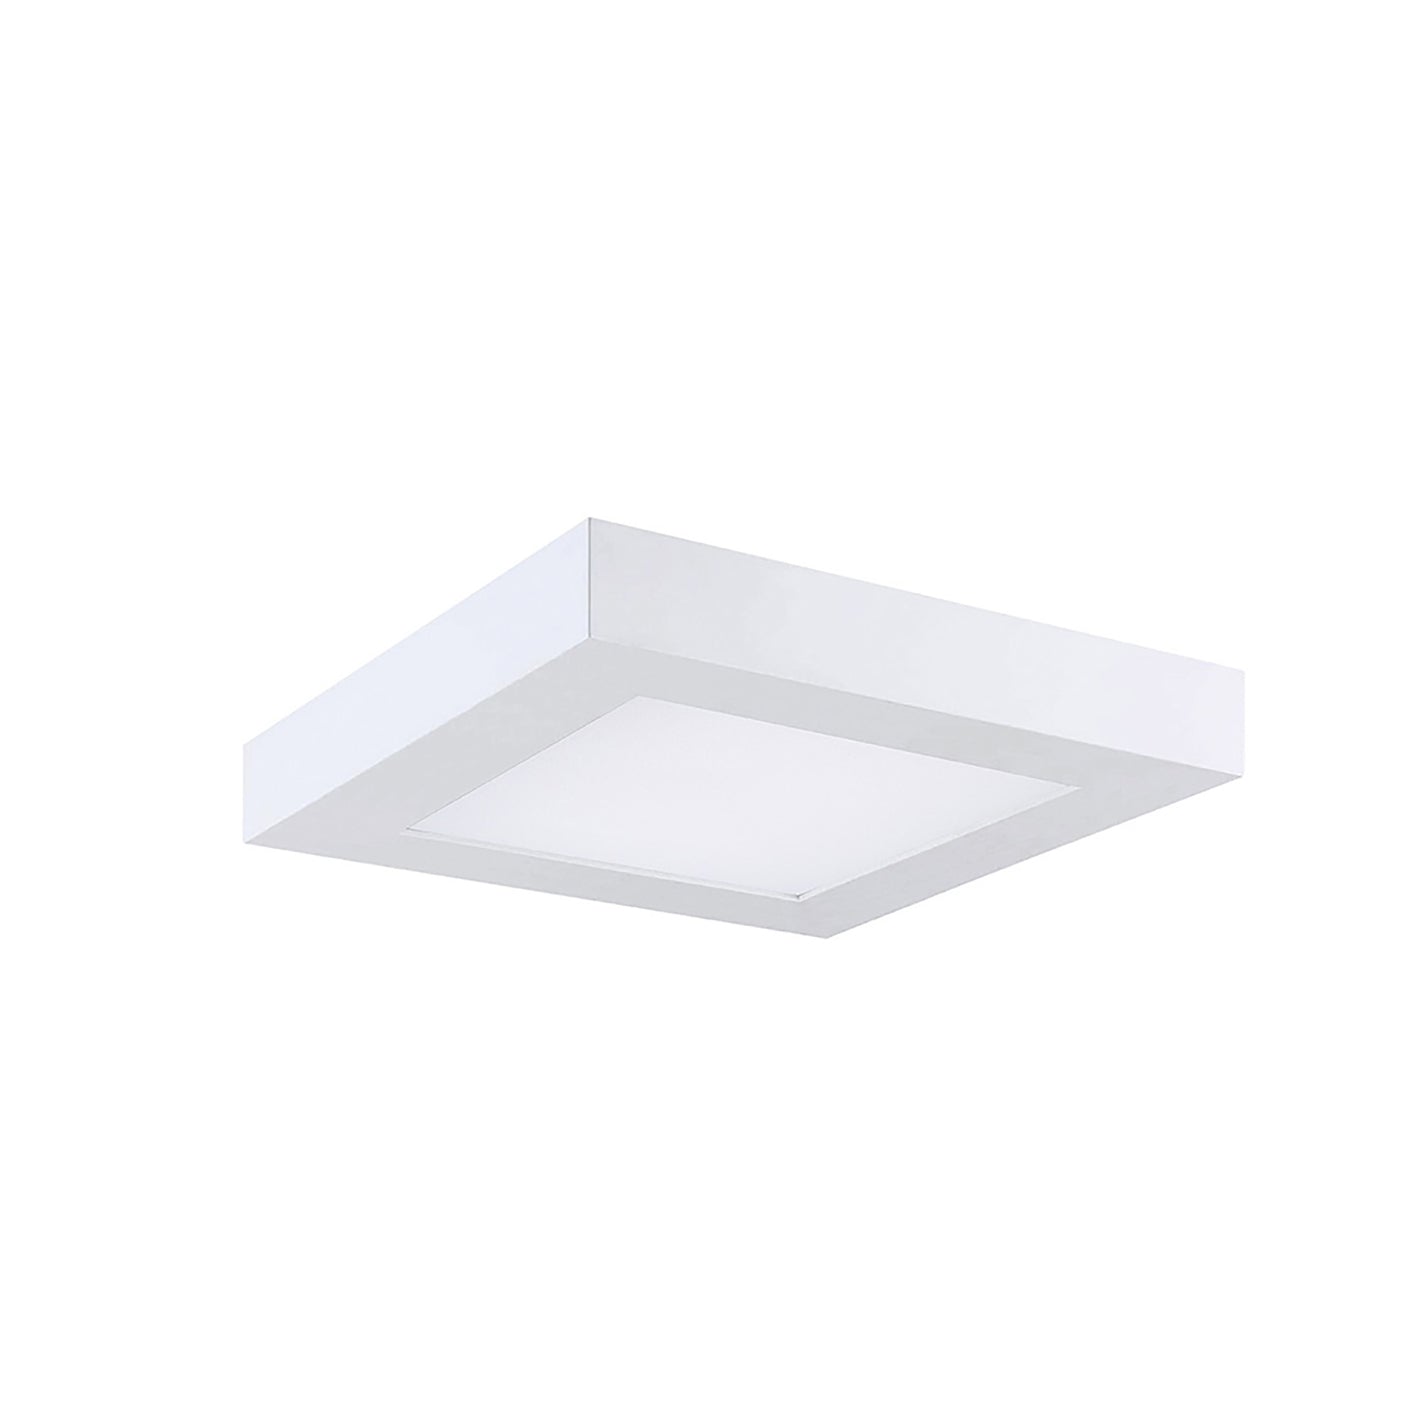 5.5 Inch Square 5CCT Color Selectable Surface Mount Panel Light Fixture, White Finish